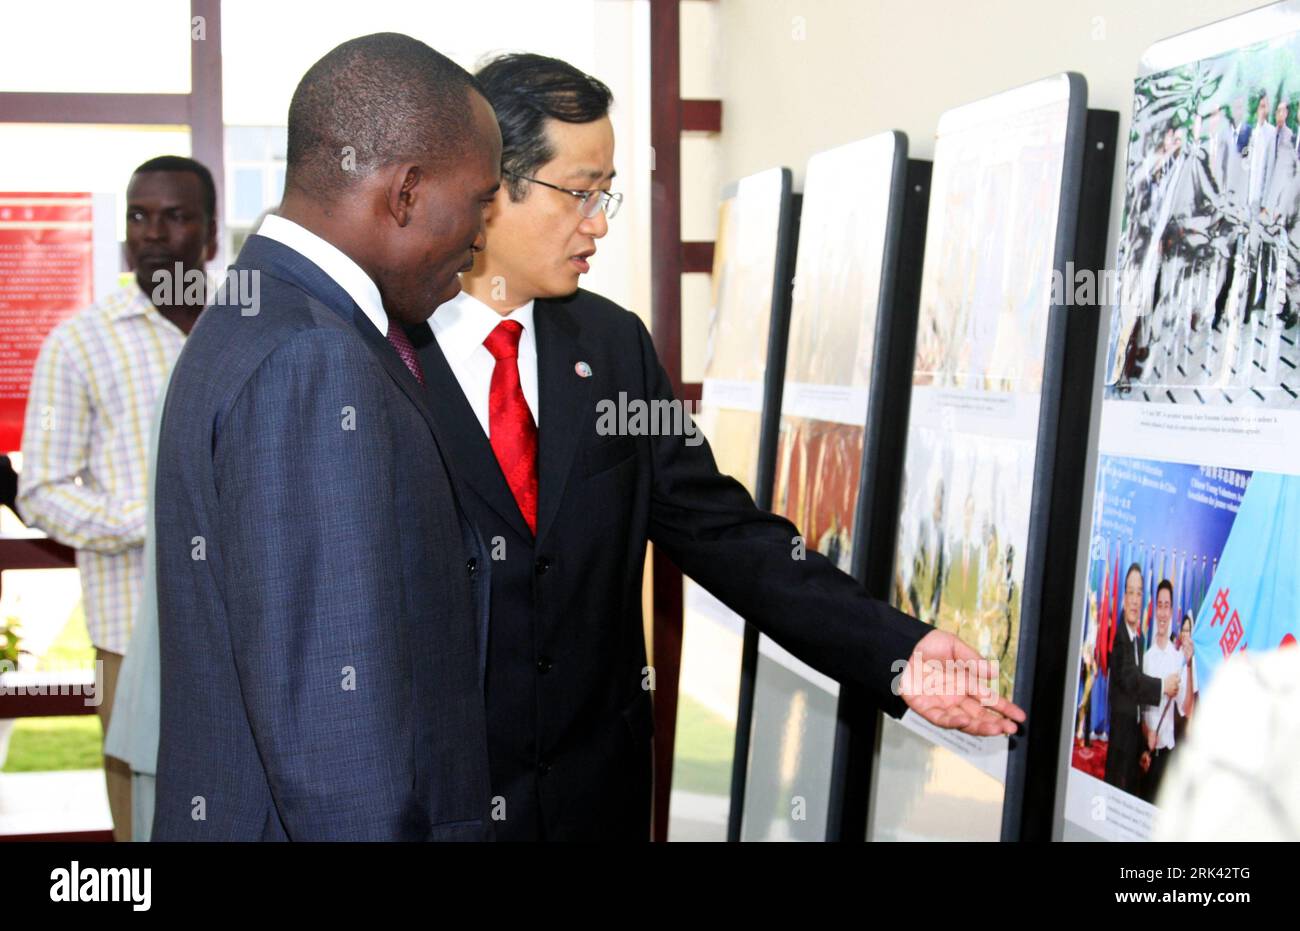 Bildnummer: 53579385  Datum: 04.11.2009  Copyright: imago/Xinhua  Chinese Ambassador to Togo Yang Min (1st R) accompanies Togolese Cooperation Minister Gilbert Bawara (Front) to attend the photo exhibition on the achievements of follow-up actions of the Beijing Summit of Forum on Sino-African cooperation at Chinese Embassy in Togo in Lome, capital of Togo, on Nov. 4, 2009. The photo exhibition was opened here on Wednesday. (Xinhua/Li Benzhong) (lr) (2)TOGO-LOME-PHOTO EXHIBITION-ACHIEVEMENTS OF FOLLOW-UP ACTIONS OF THE BEIJING SUMMIT OF FORUM ON SINO-AFRICAN COOPERATION PUBLICATIONxNOTxINxCHN P Stock Photo